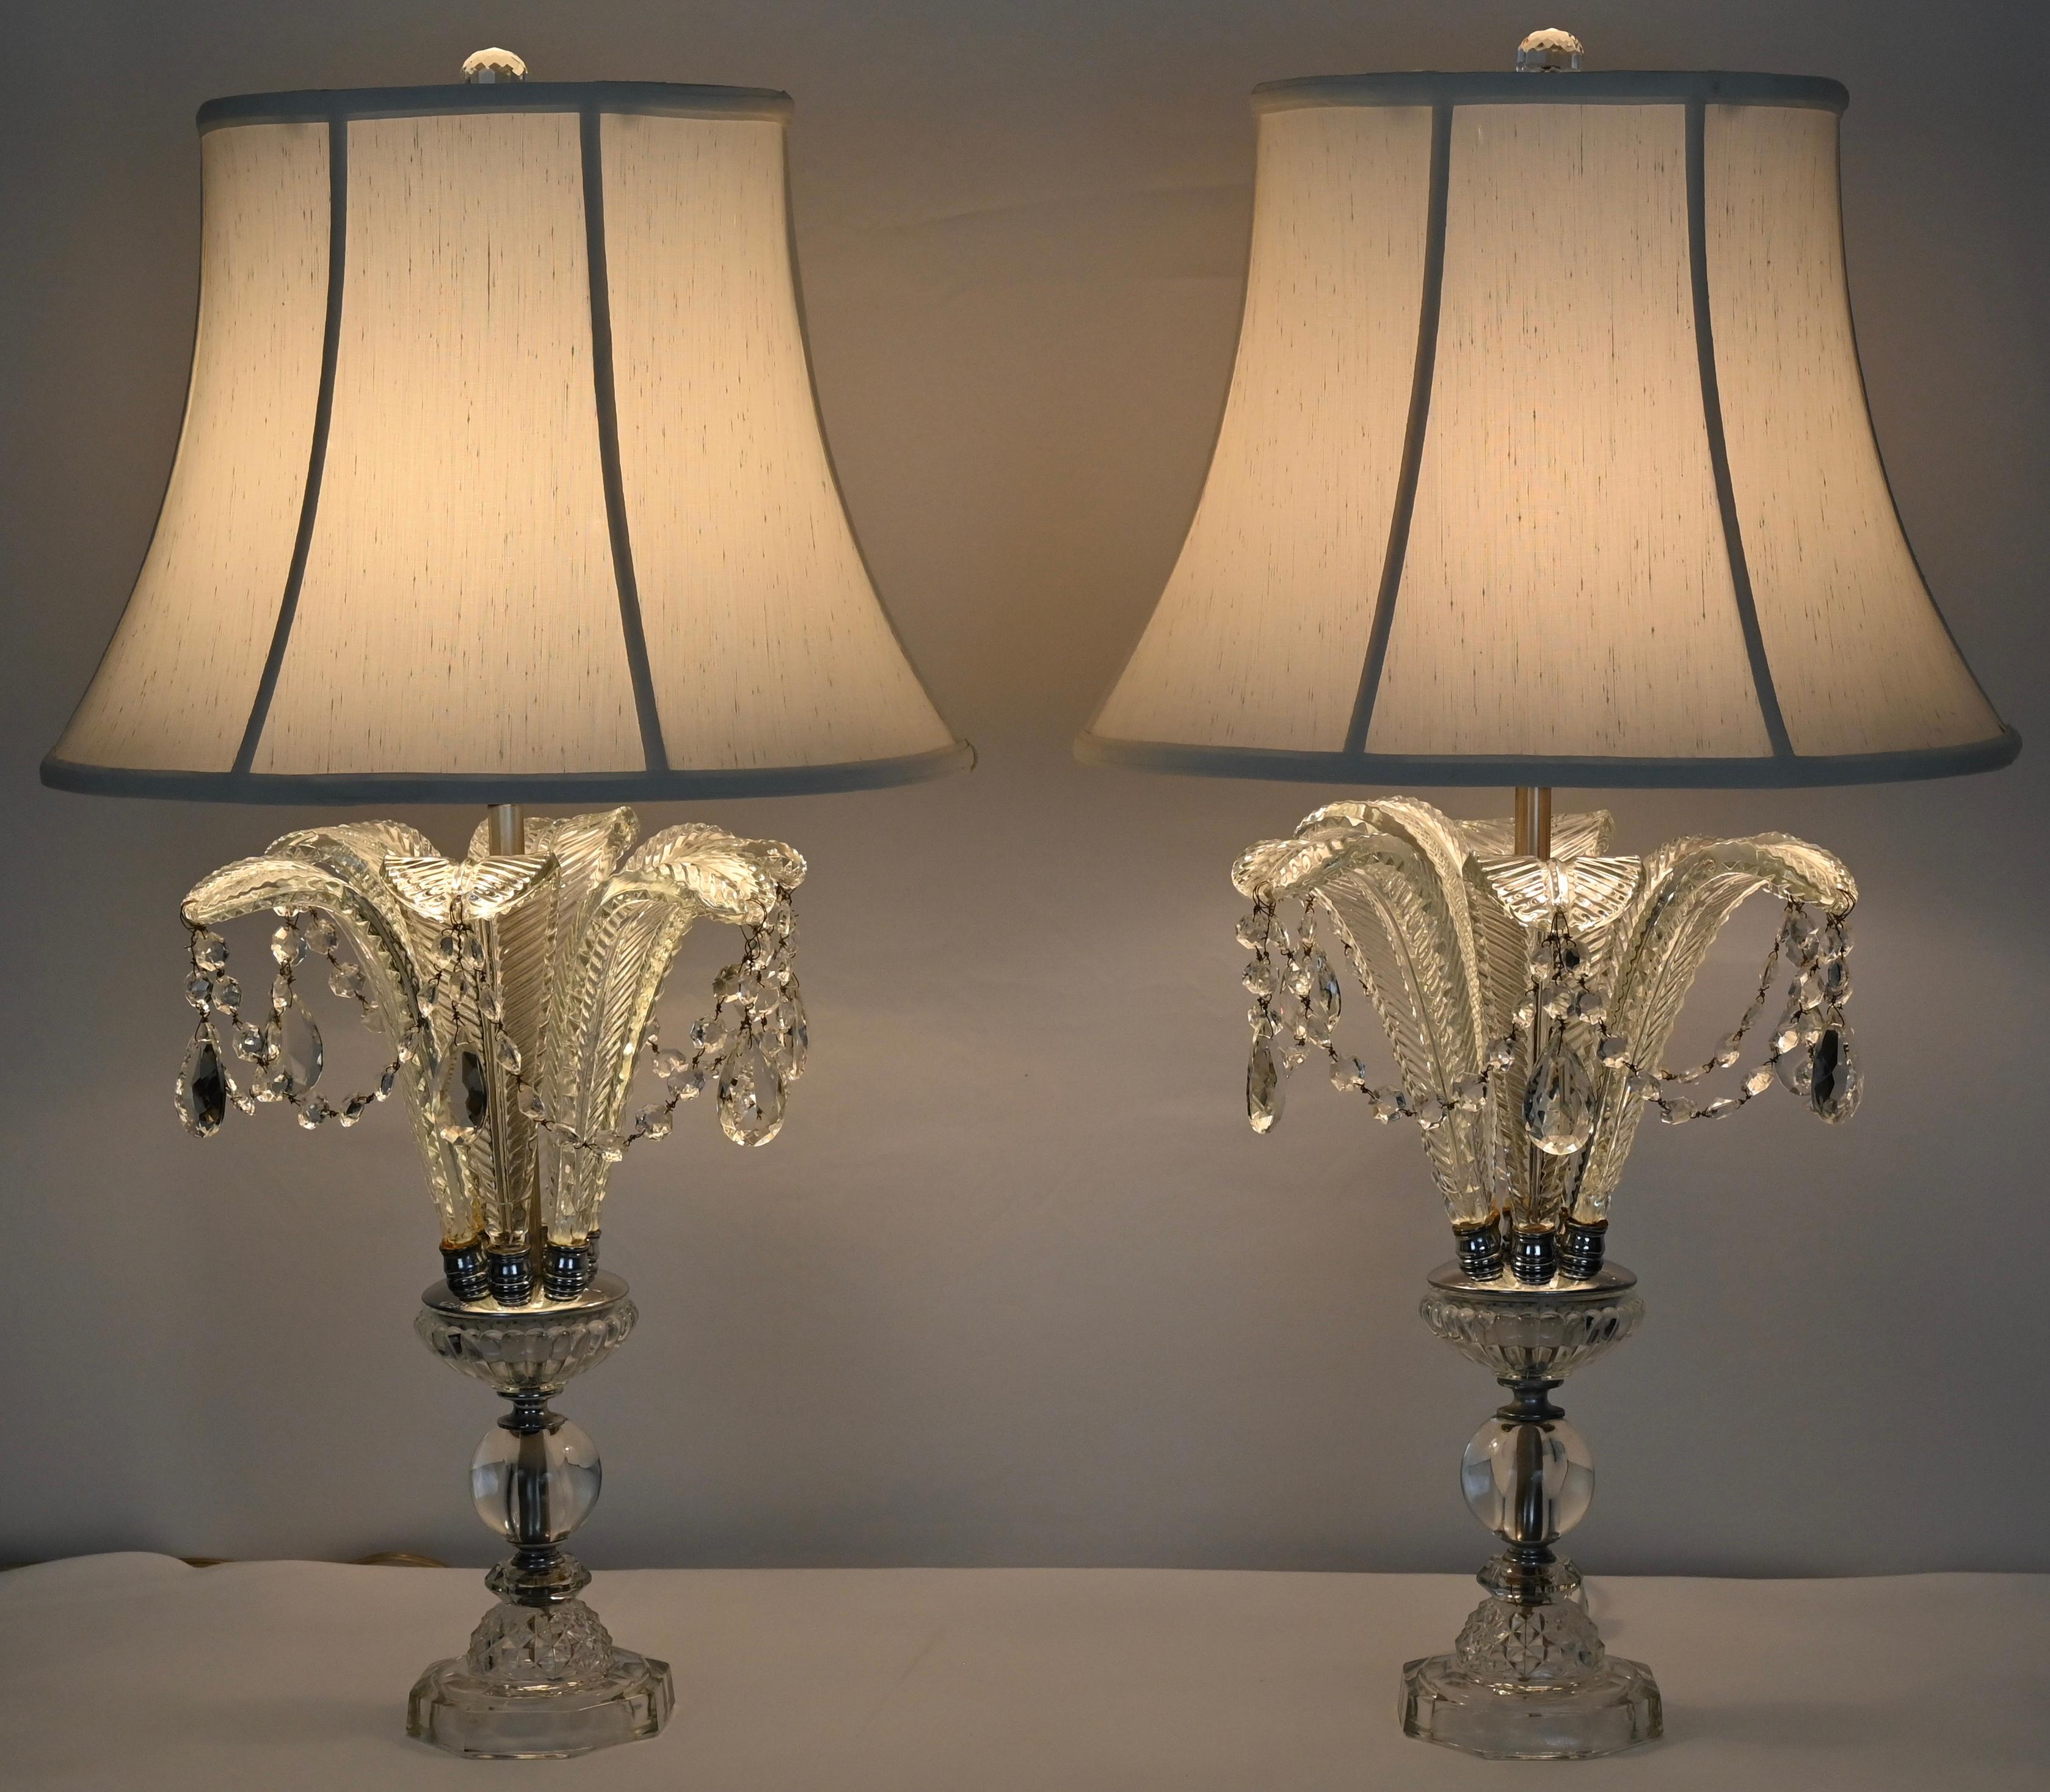 Neoclassical Pair of Hollywood Regency Glass and Cut Crystal Table Lamps For Sale